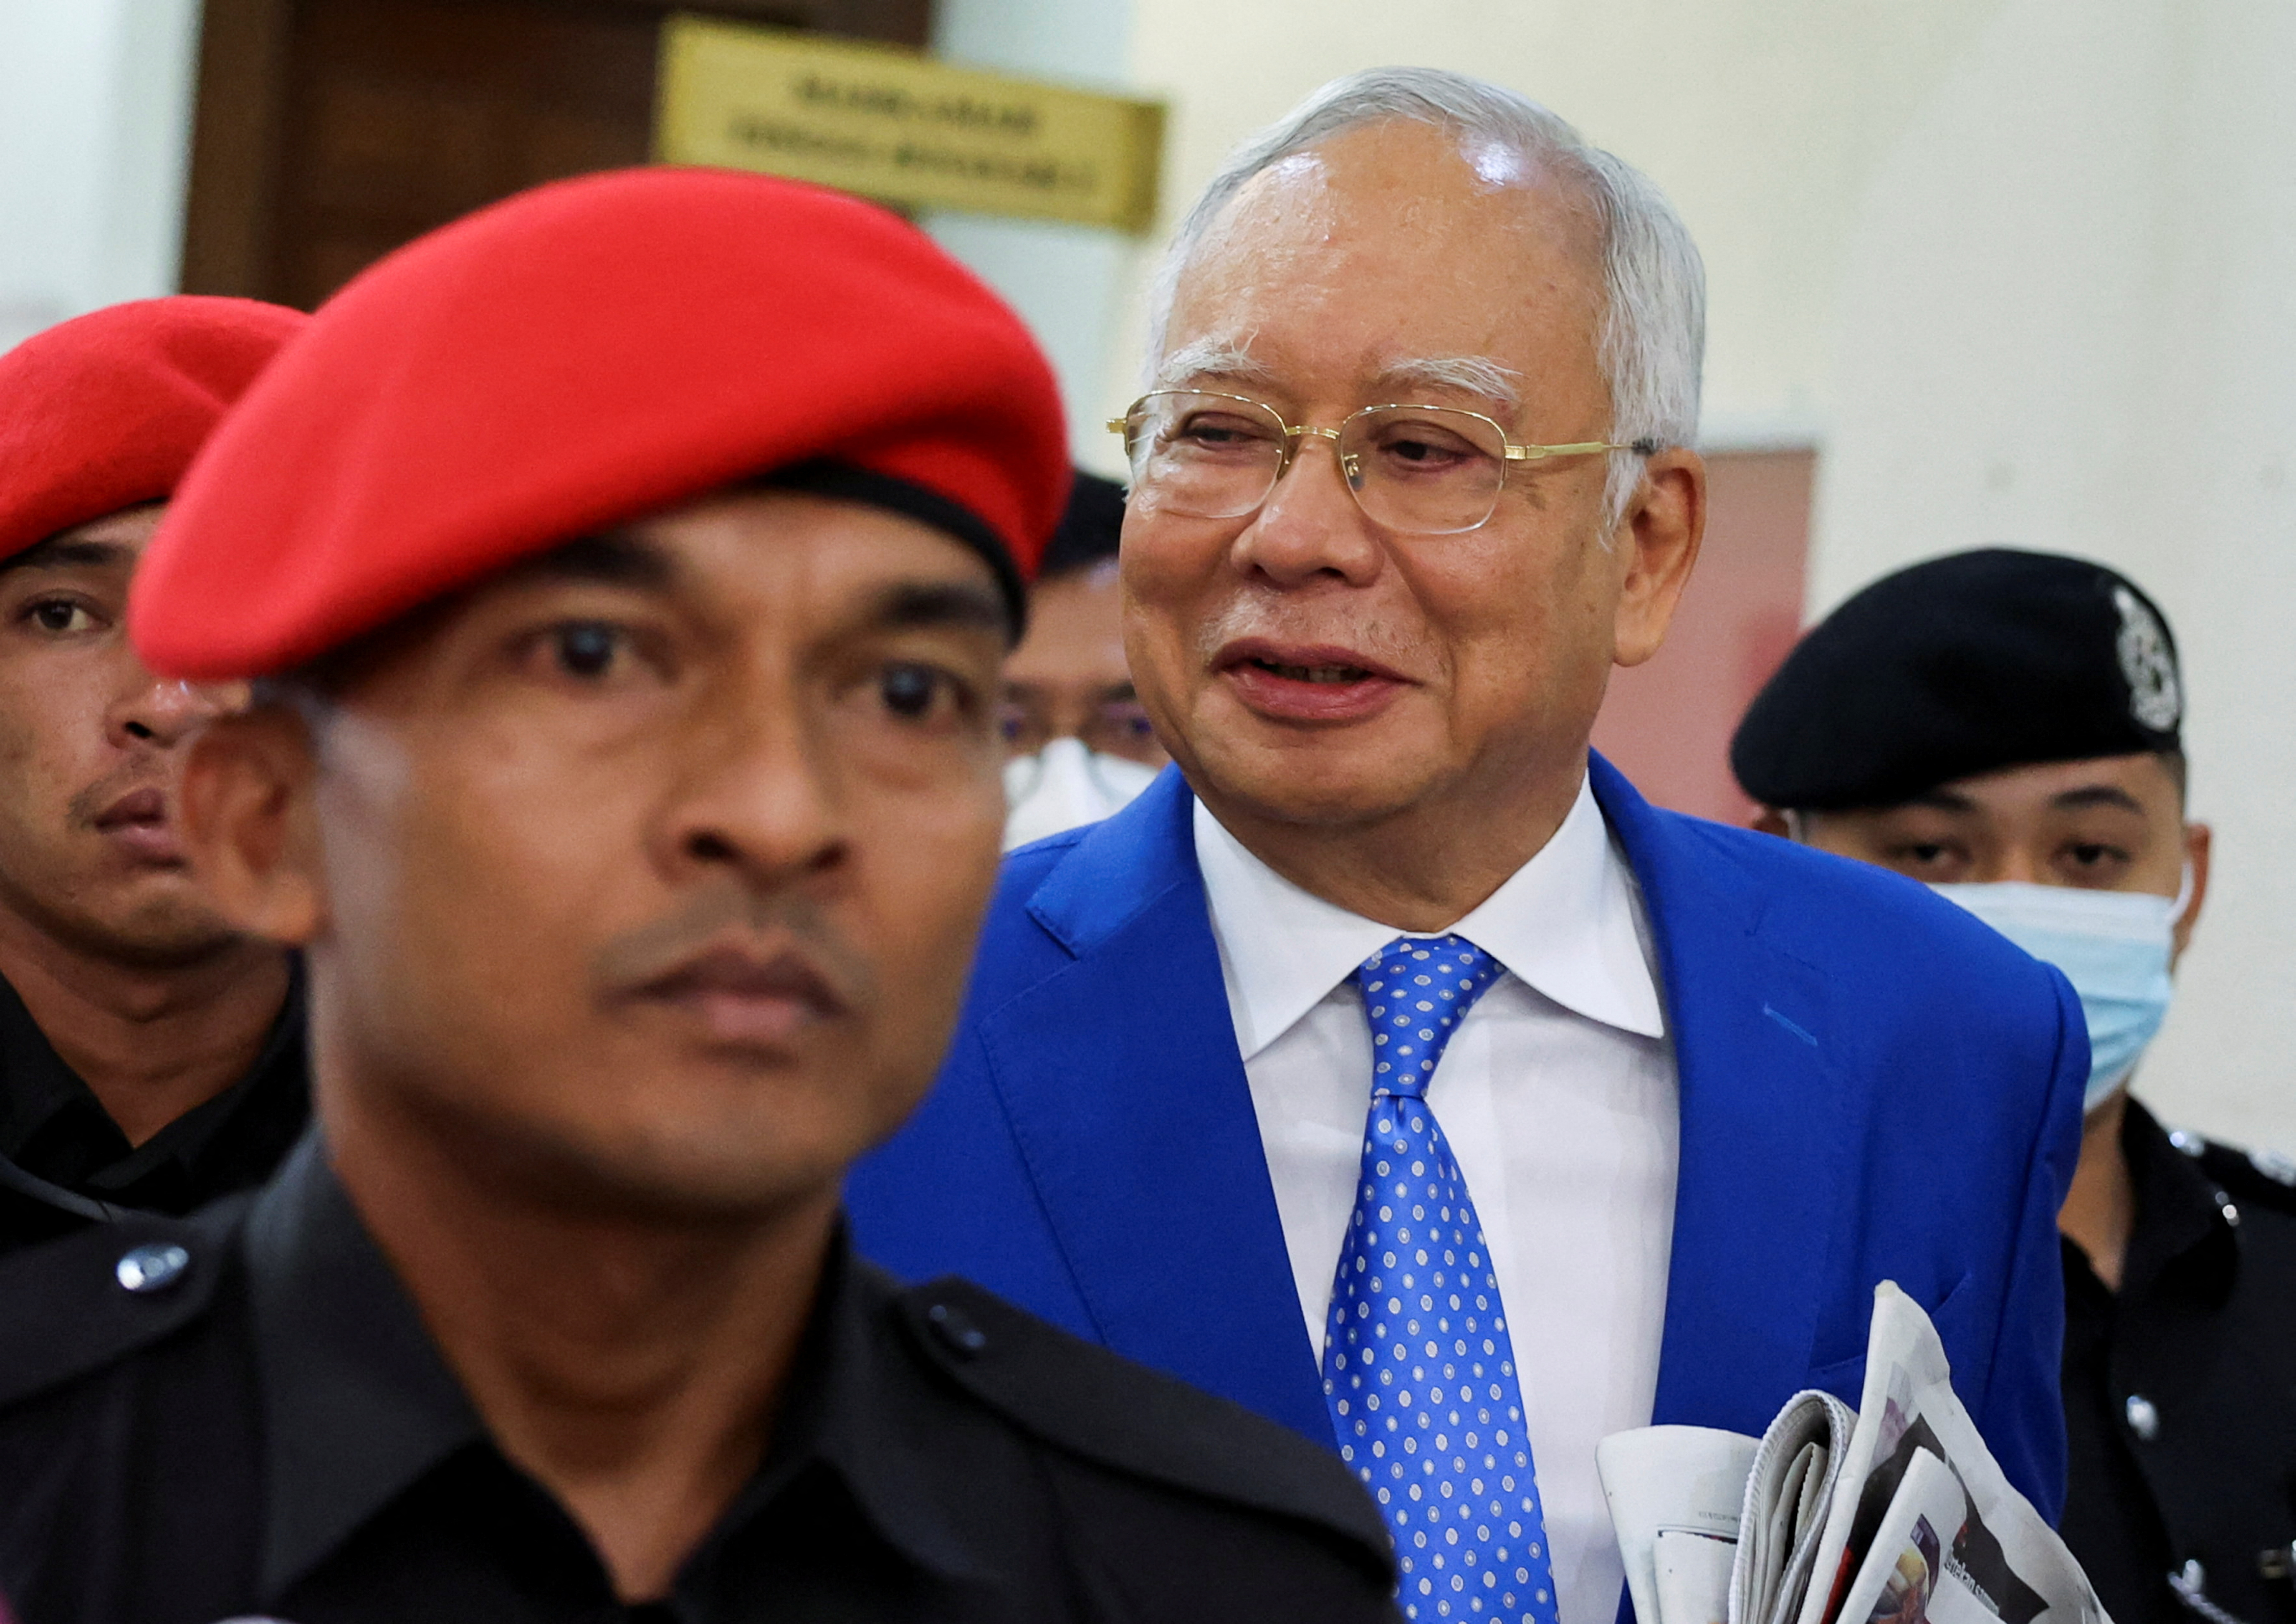 Former Malaysian Prime Minister Najib Razak is escorted by prison officers as the jailed politician leaves the court after court proceedings in Kuala Lumpur